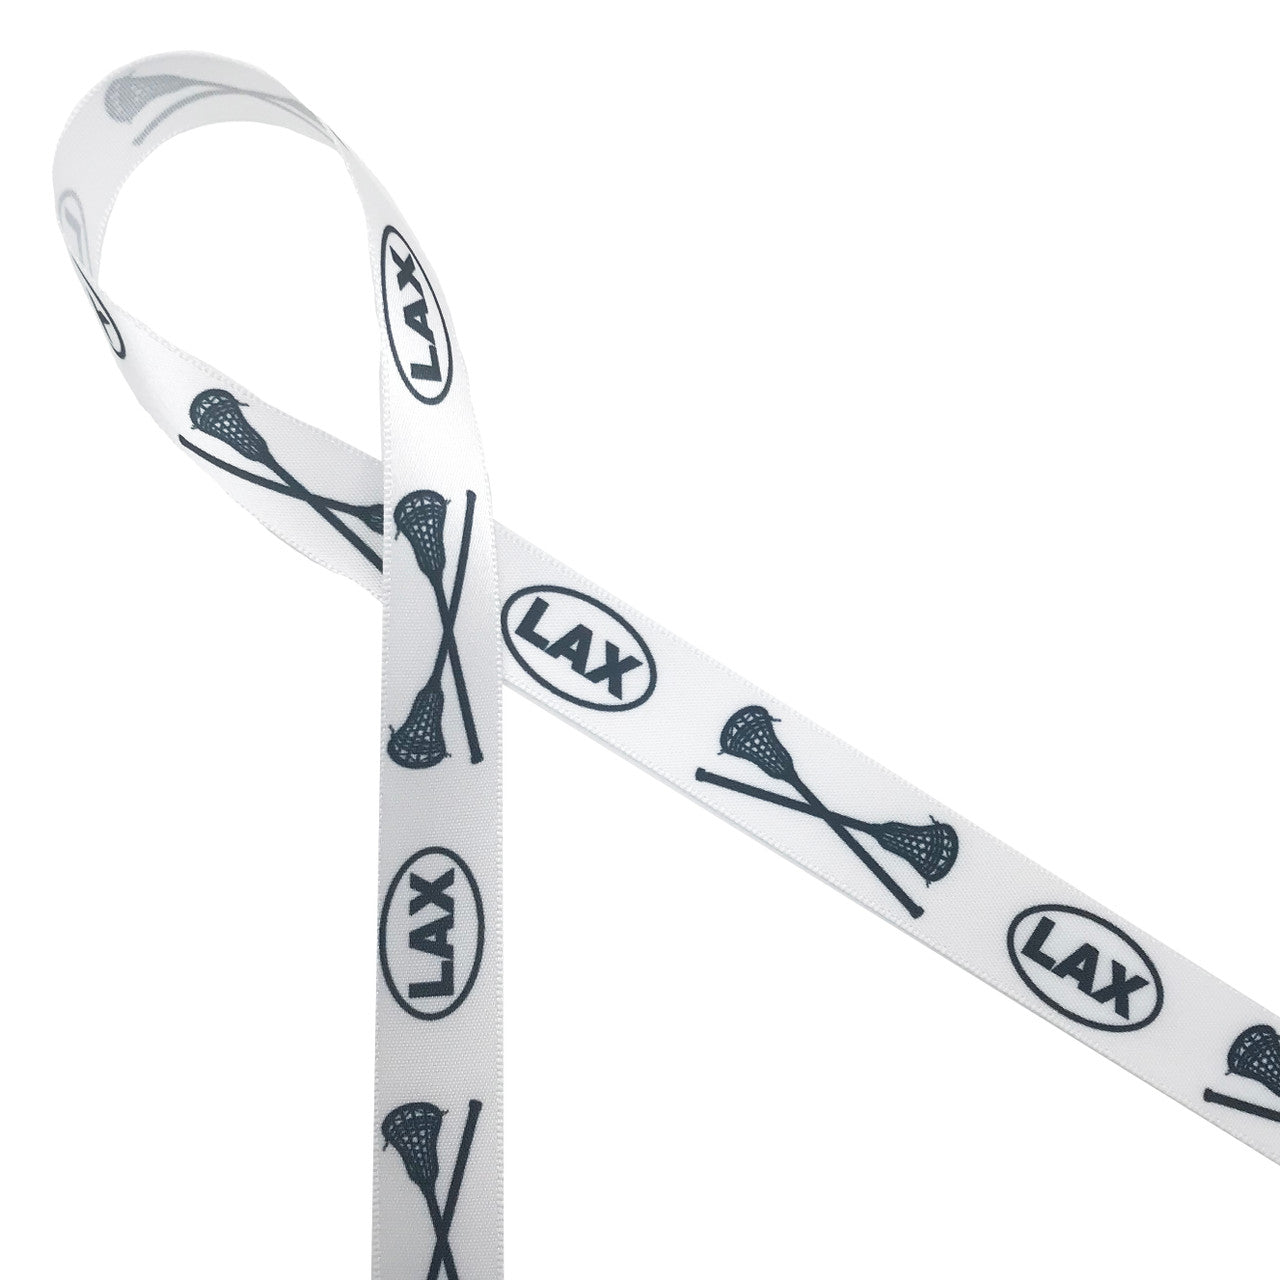 Lacrosse themed ribbon consisting of LAX in an oval followed by crossed lacrosse sticks printed in black on 5/8" white single face satin ribbon.